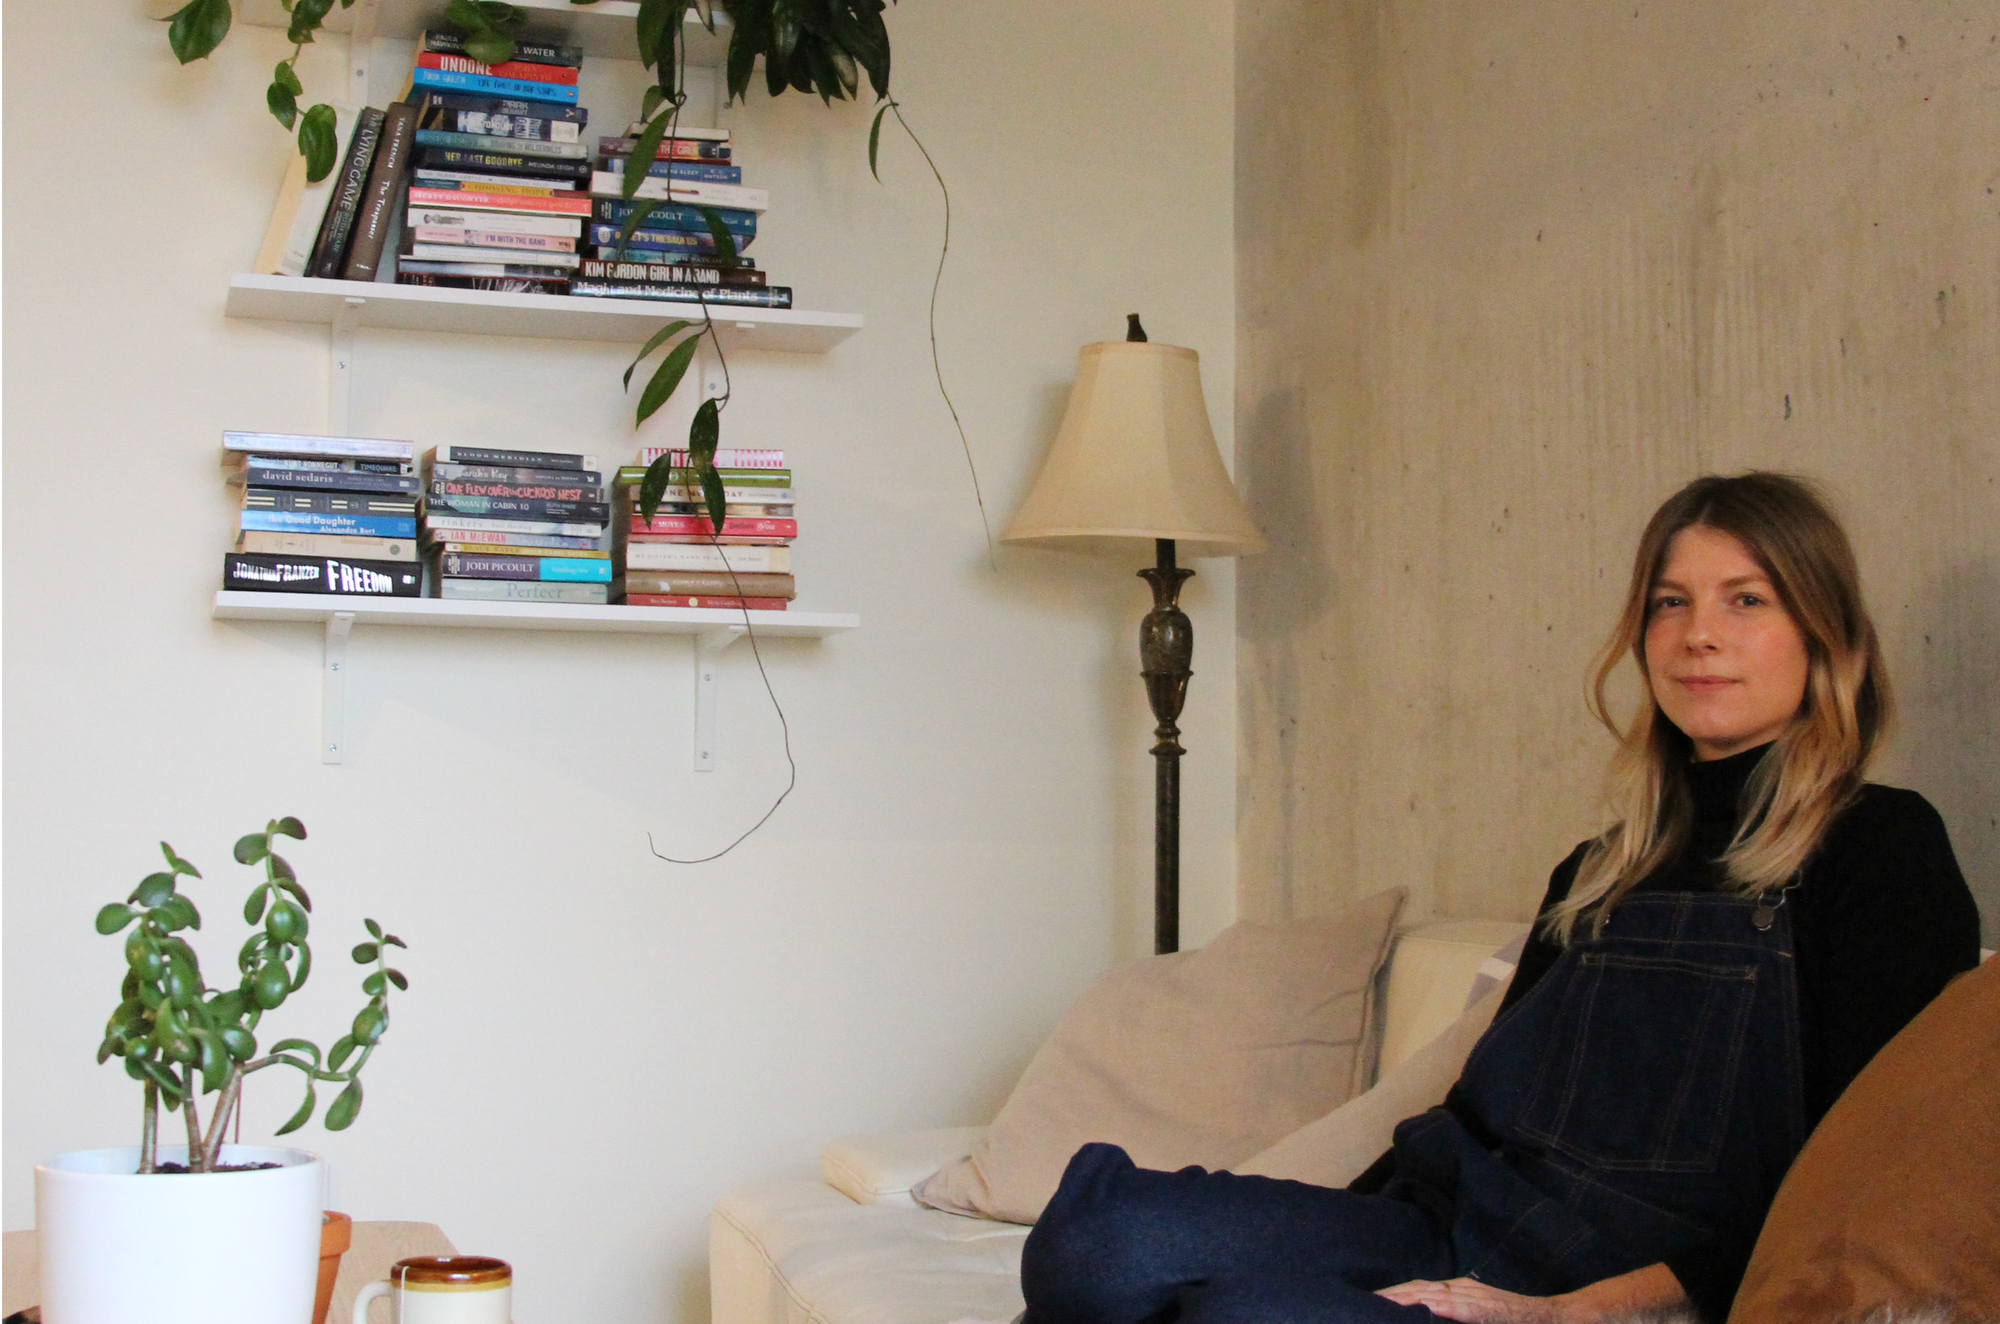 Interview with a good woman: Morgan Dowler from Eleventh House